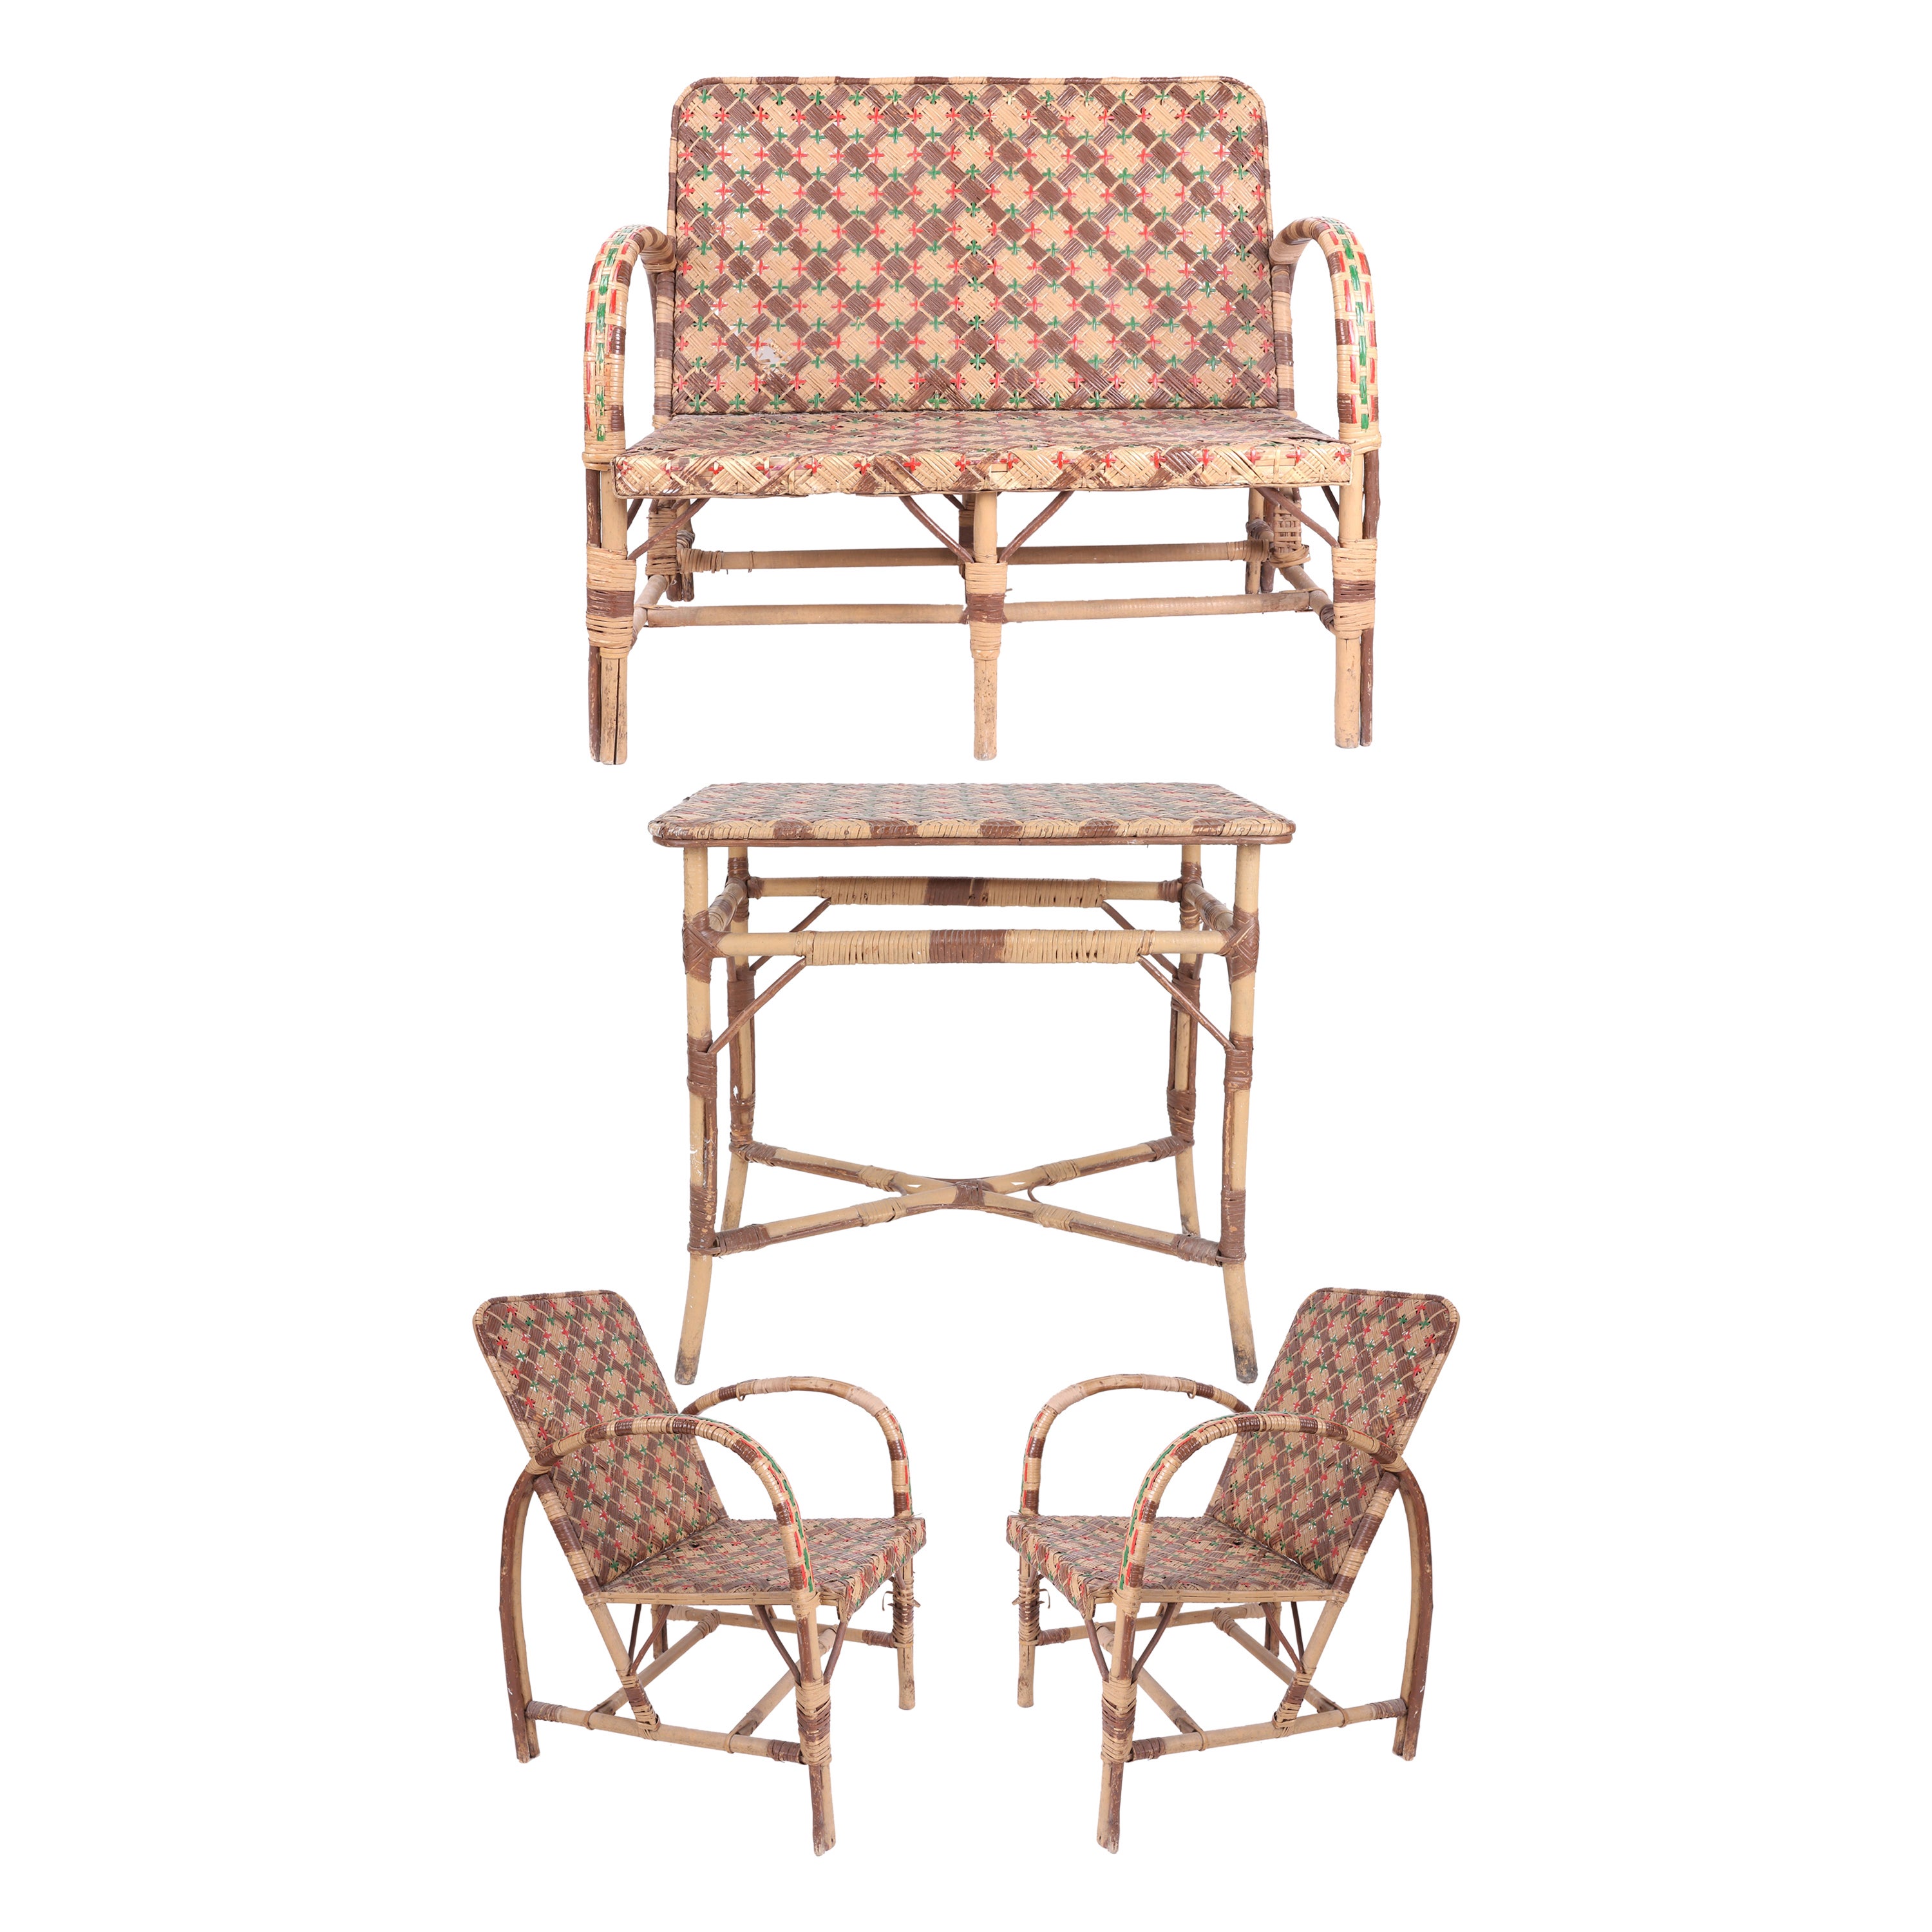 1950s Spanish Set Consisting of Sofa, Two Armchairs and Wicker Table